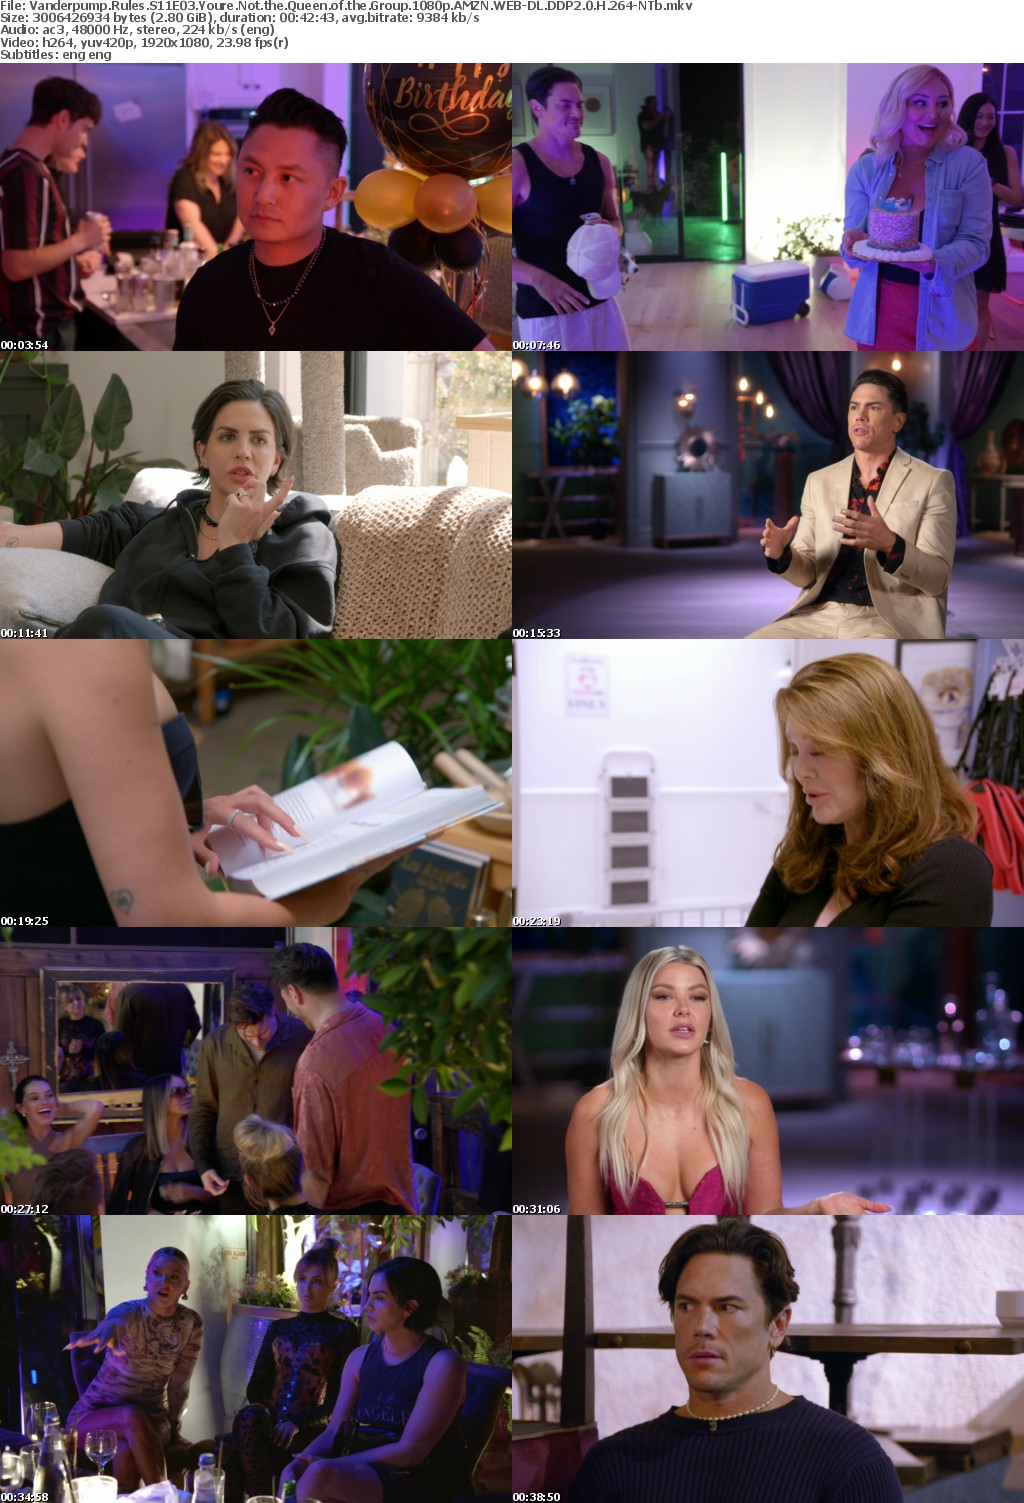 Vanderpump Rules S11E03 Youre Not the Queen of the Group 1080p AMZN WEB-DL DDP2 0 H 264-NTb